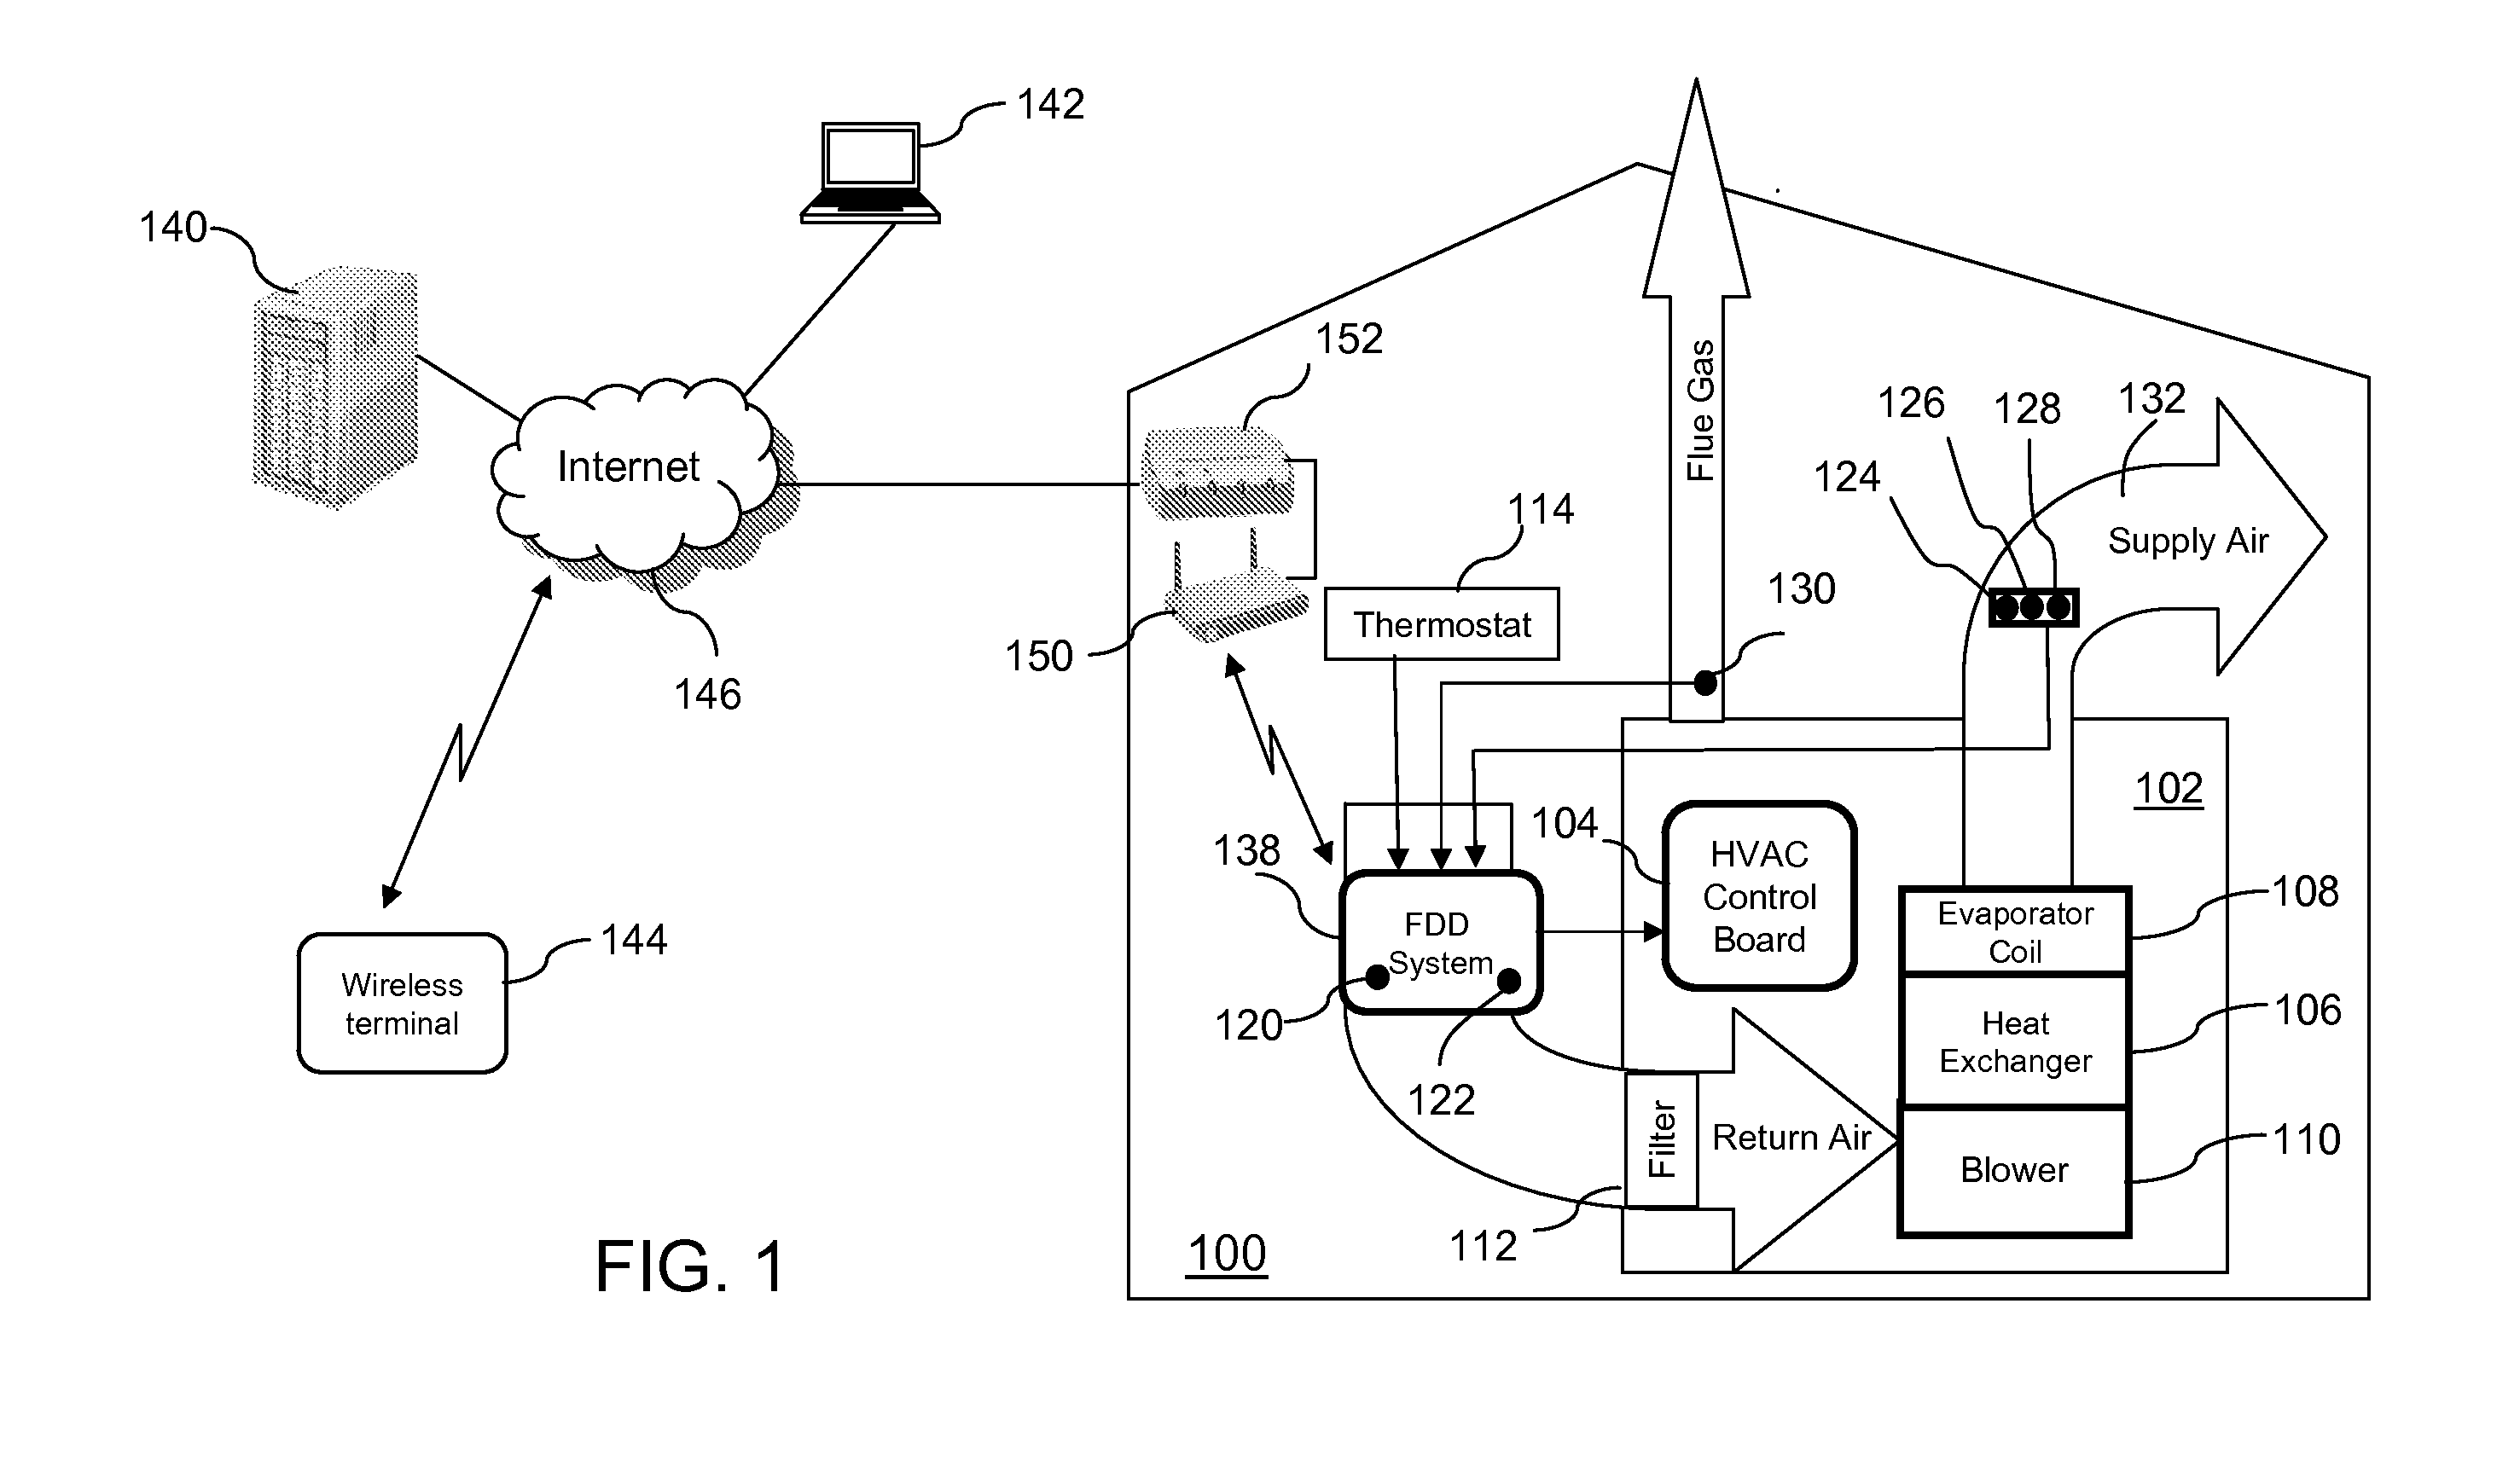 Intelligent system and method for detecting and diagnosing faults in heating, ventilating and air conditioning (HVAC) equipment